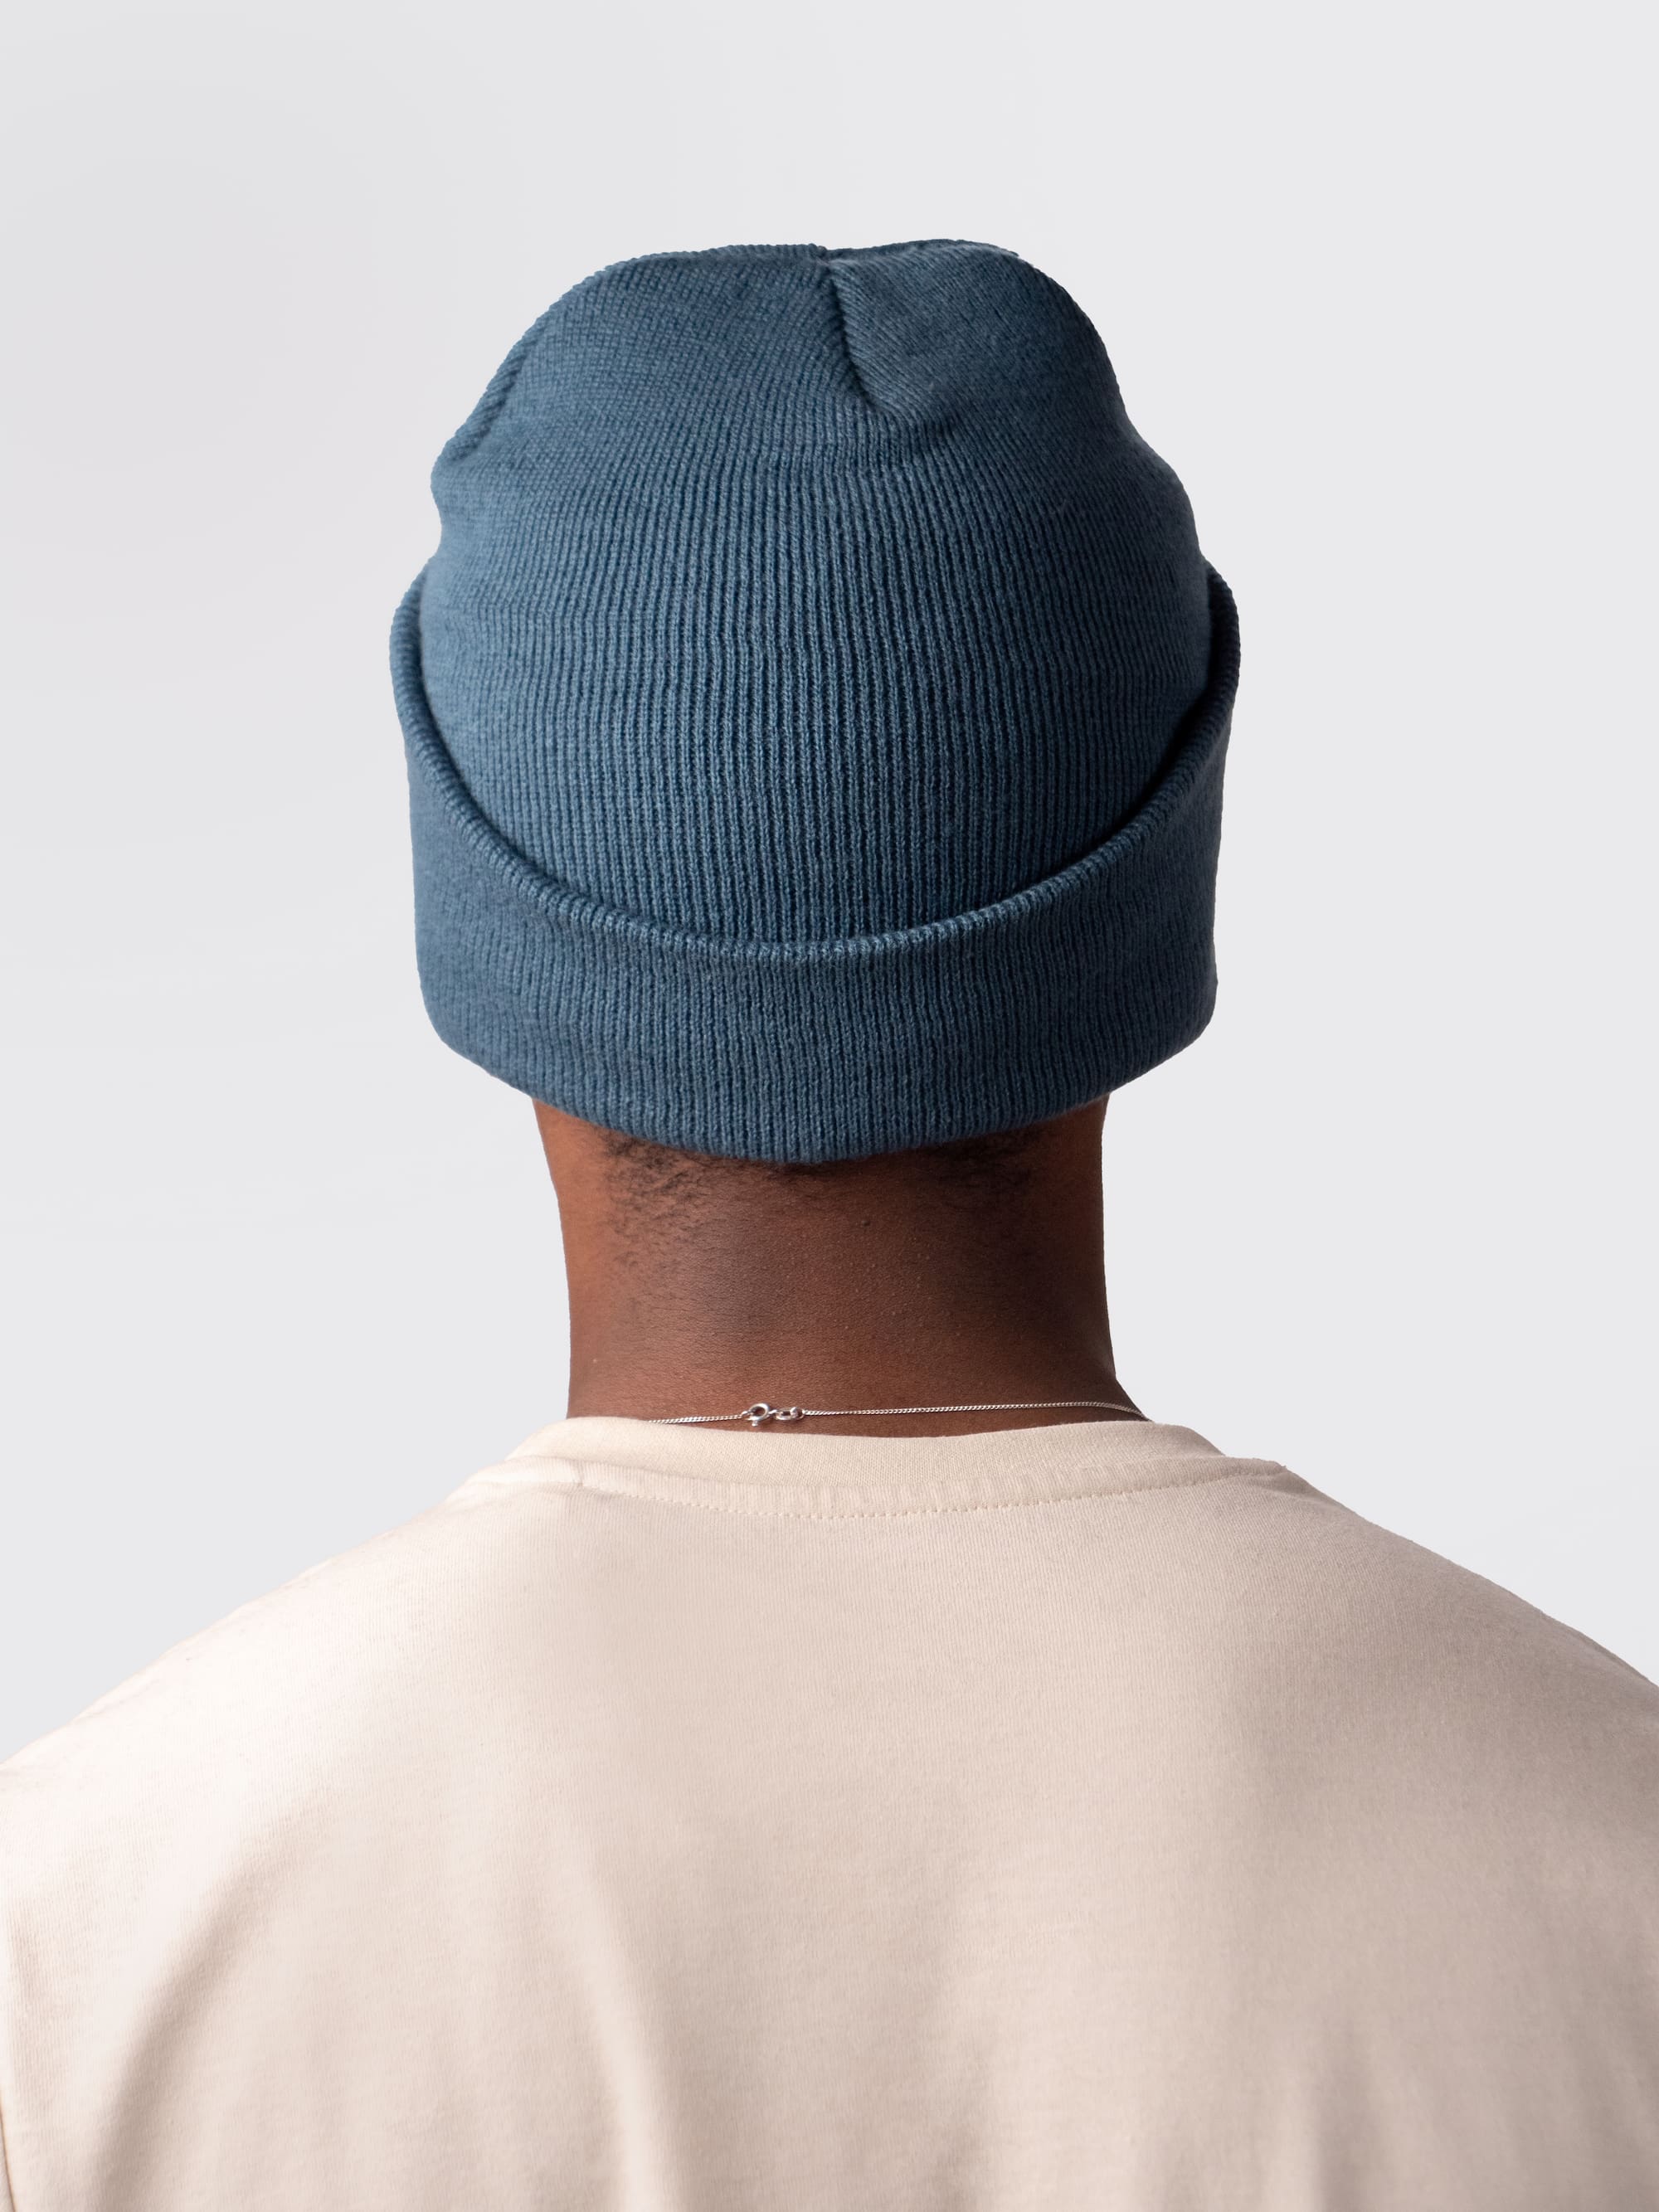 The back of an extra warm, Cambridge University knitted beanie